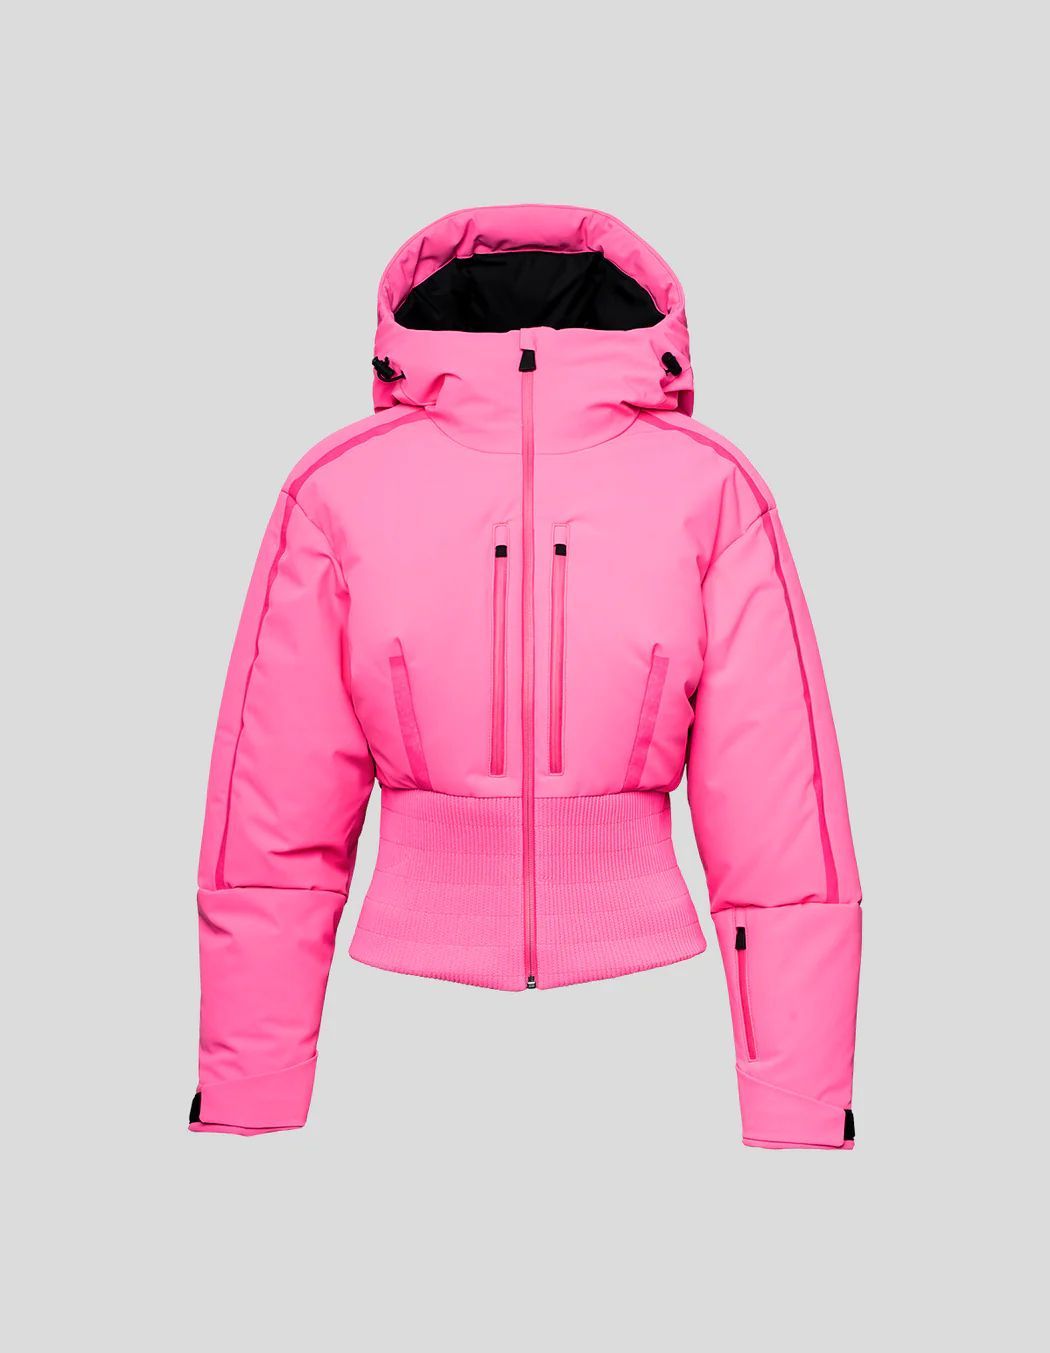 The 11 Best Women’s Ski Jackets With True Slope Style